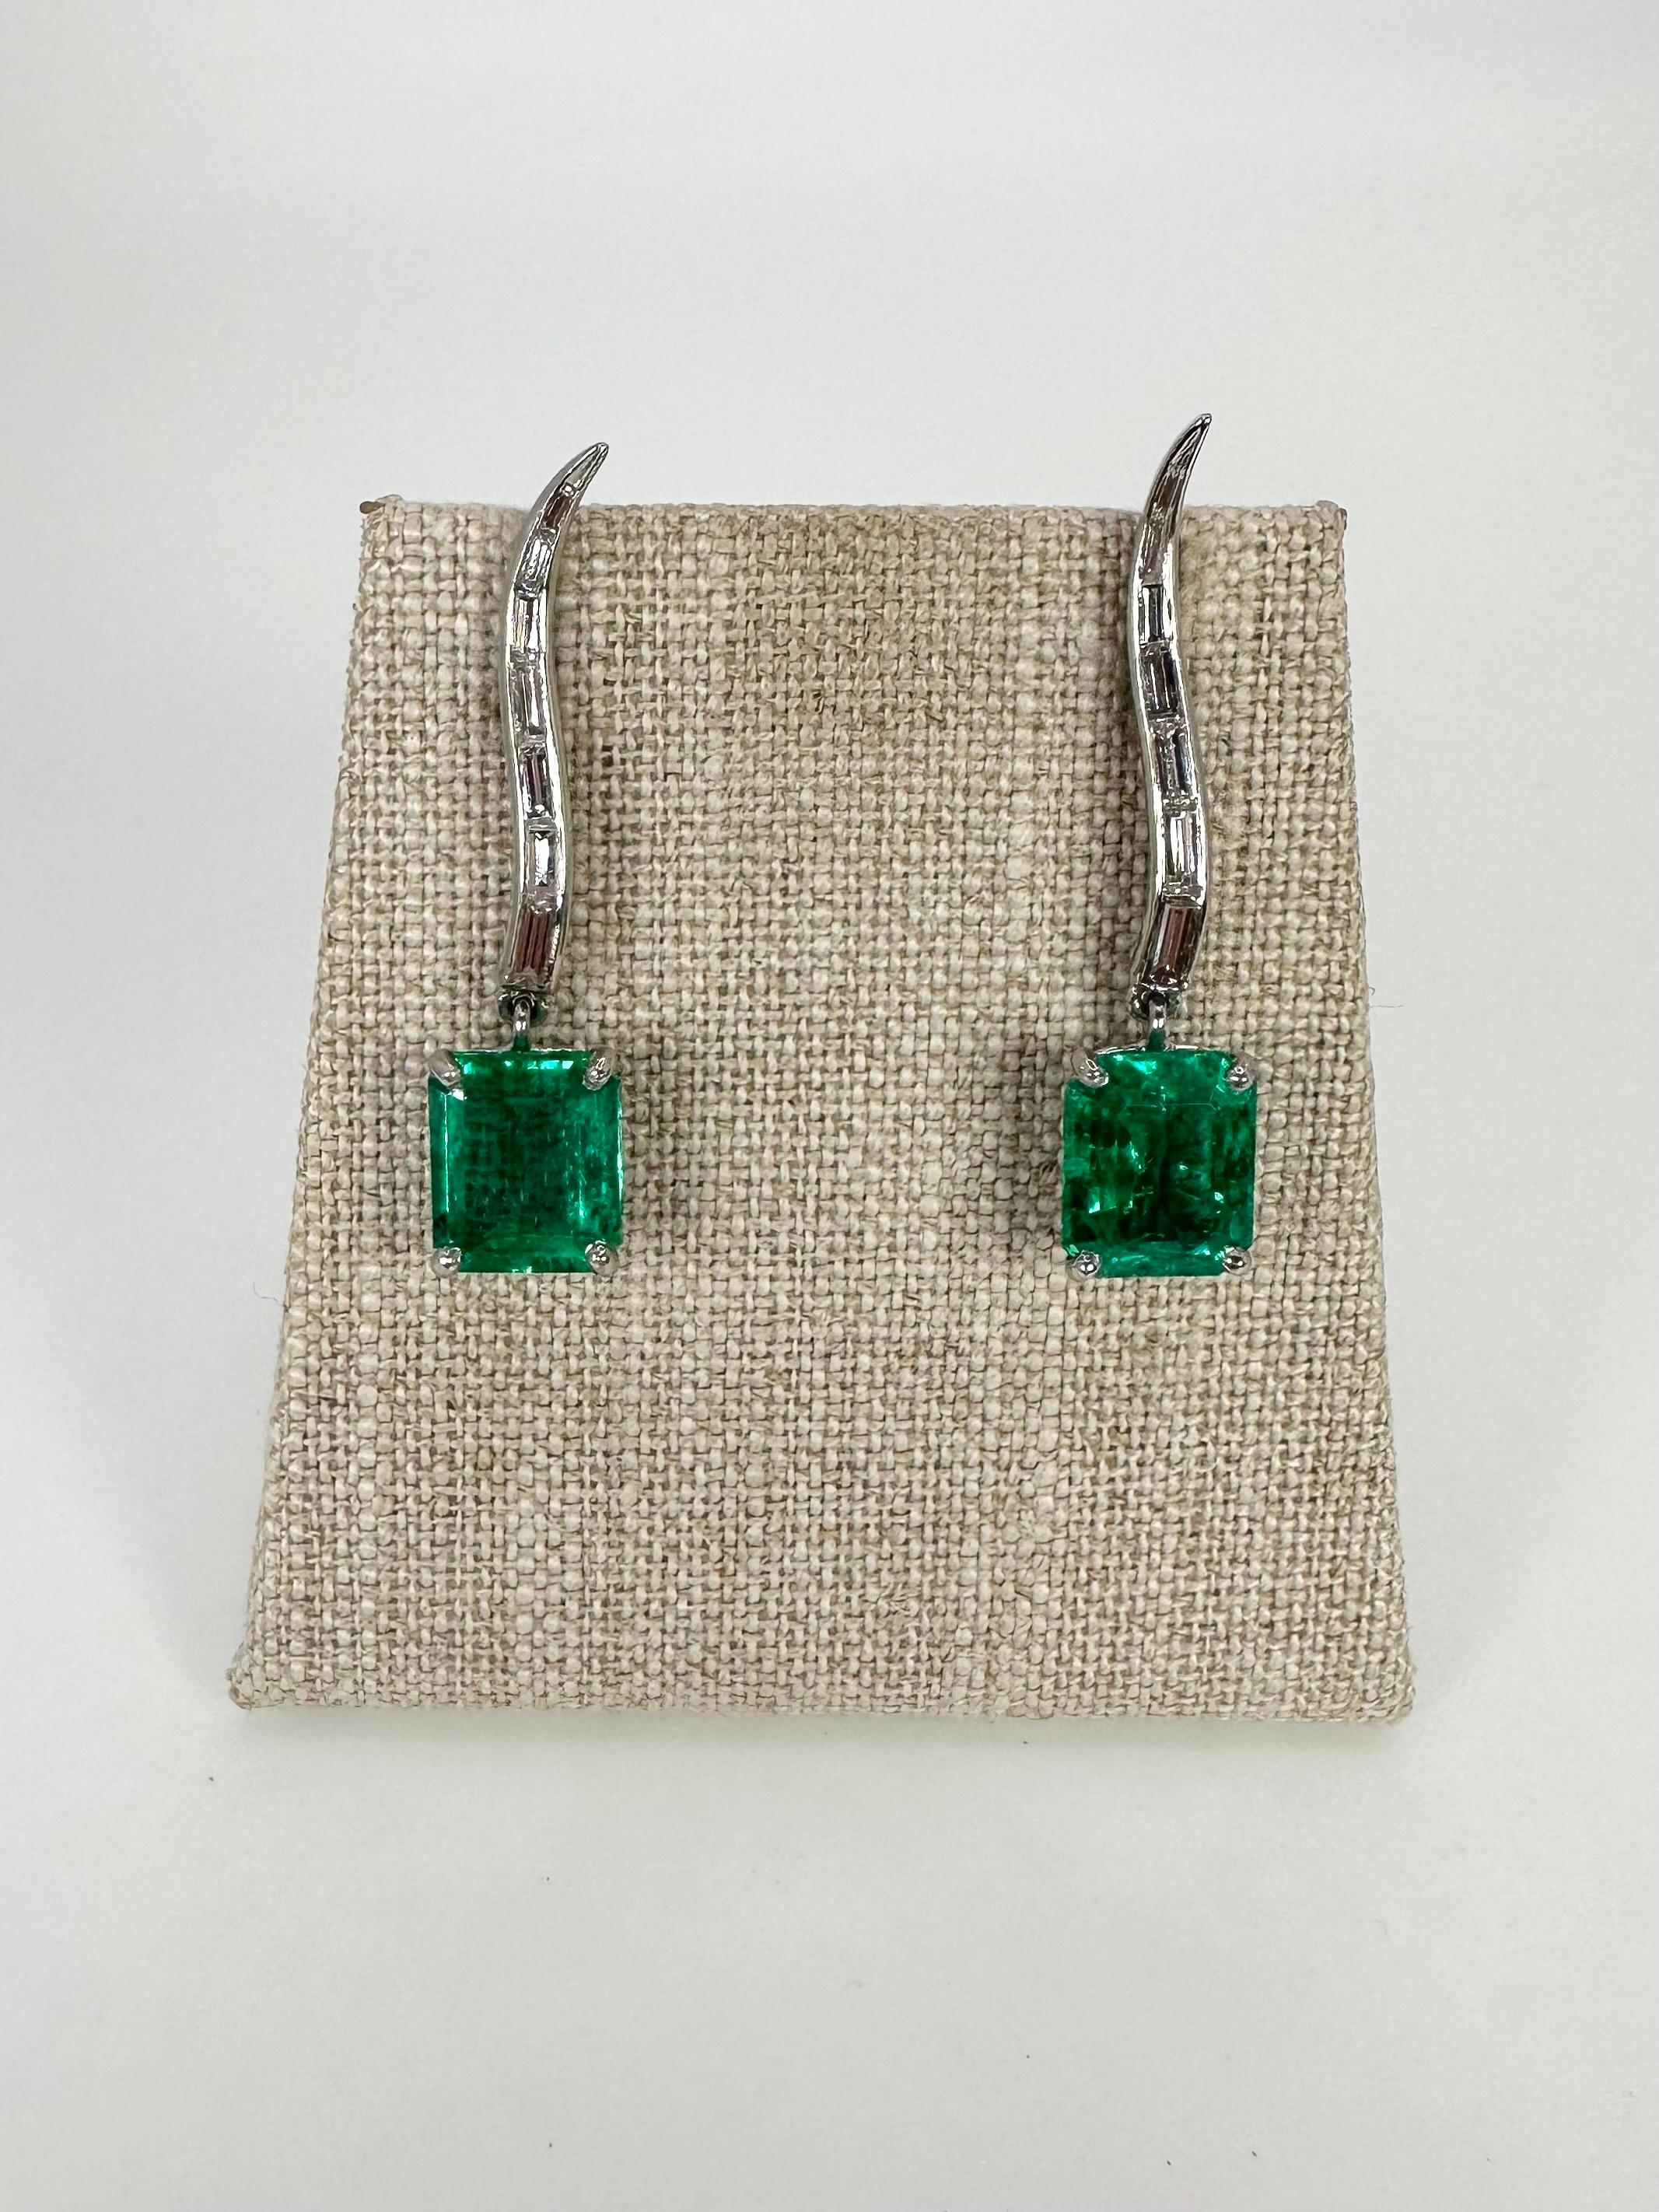 Colombian emeralds paired with natural diamonds in platinum.The earrings are luxuriously long with incredible sparkle and elegance. This is a rare find as the emeralds are certified Colombian emeralds as per GIA. (Refer to all photos)

GRAM WEIGHT: